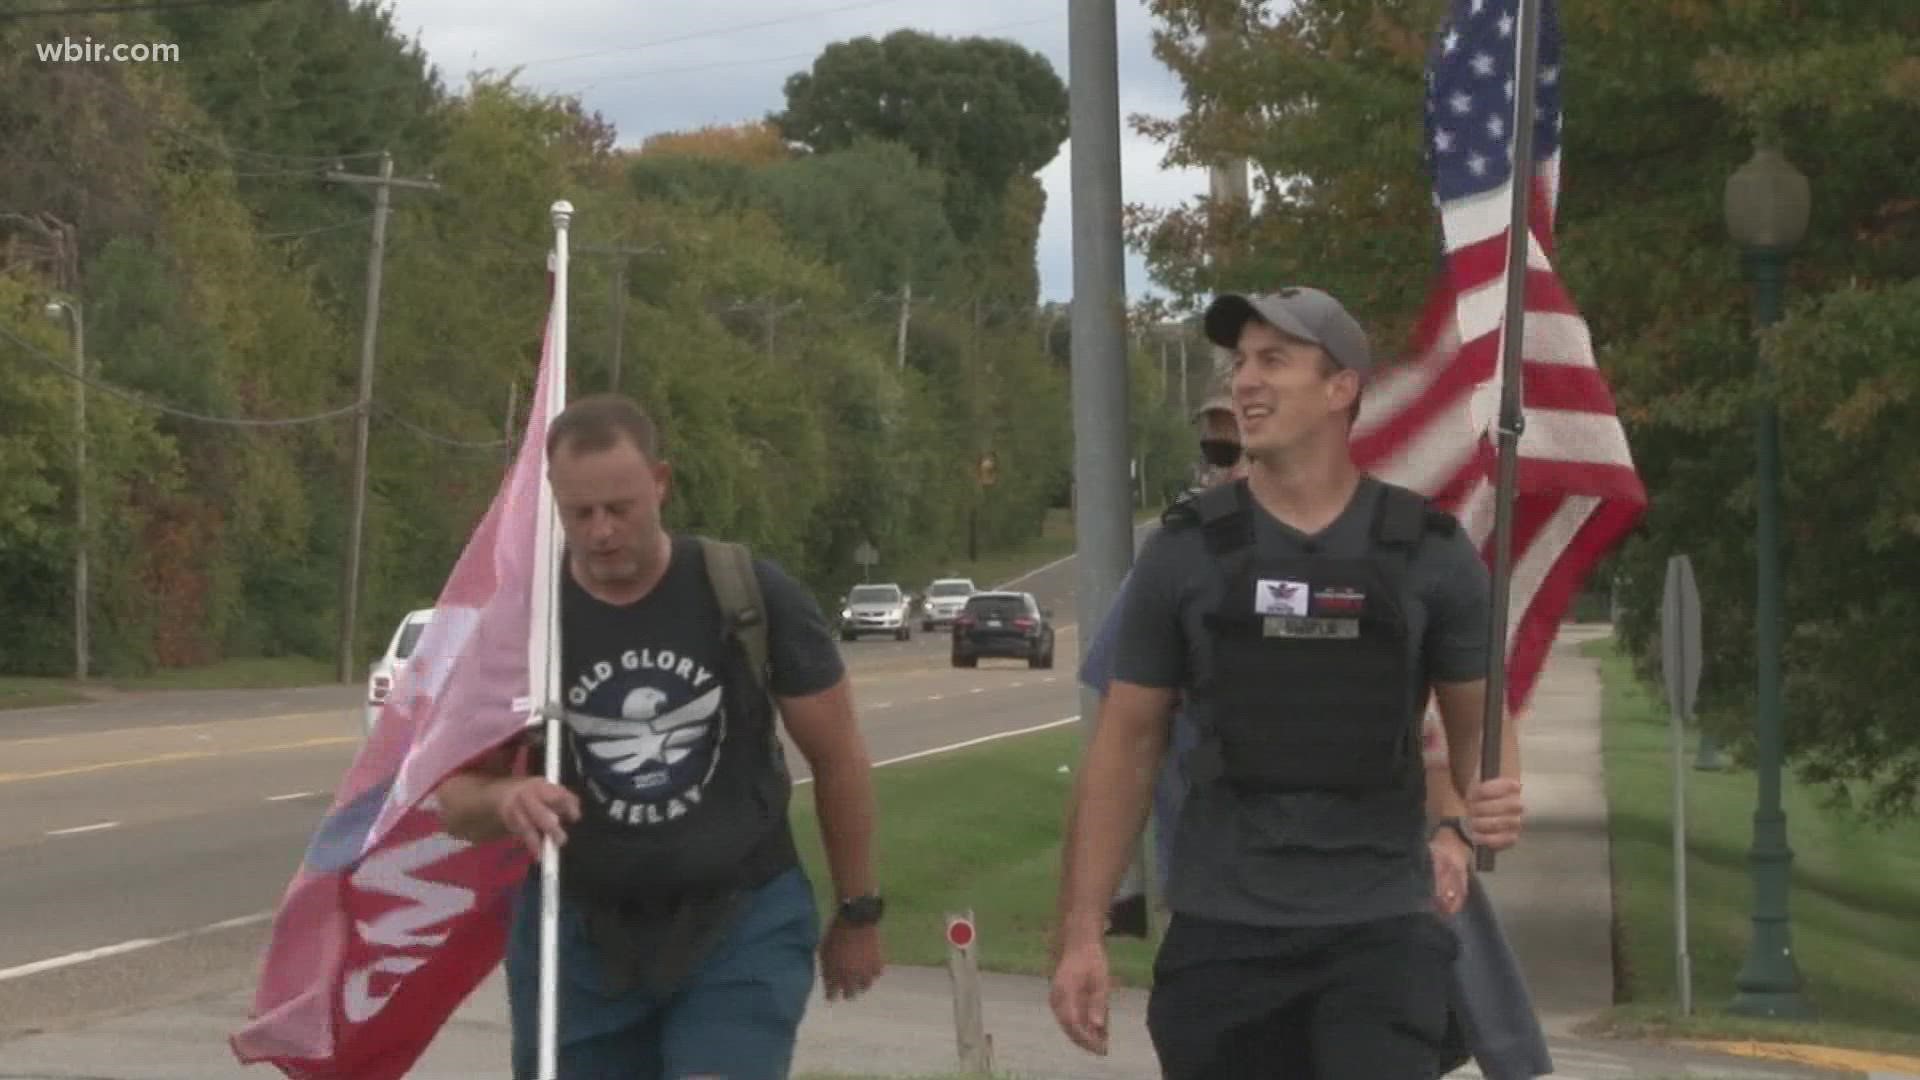 Veteran Nathan Smith carried the flag 18 miles as part of a 62-day relay that started on September 11th at the 9-11 Memorial.